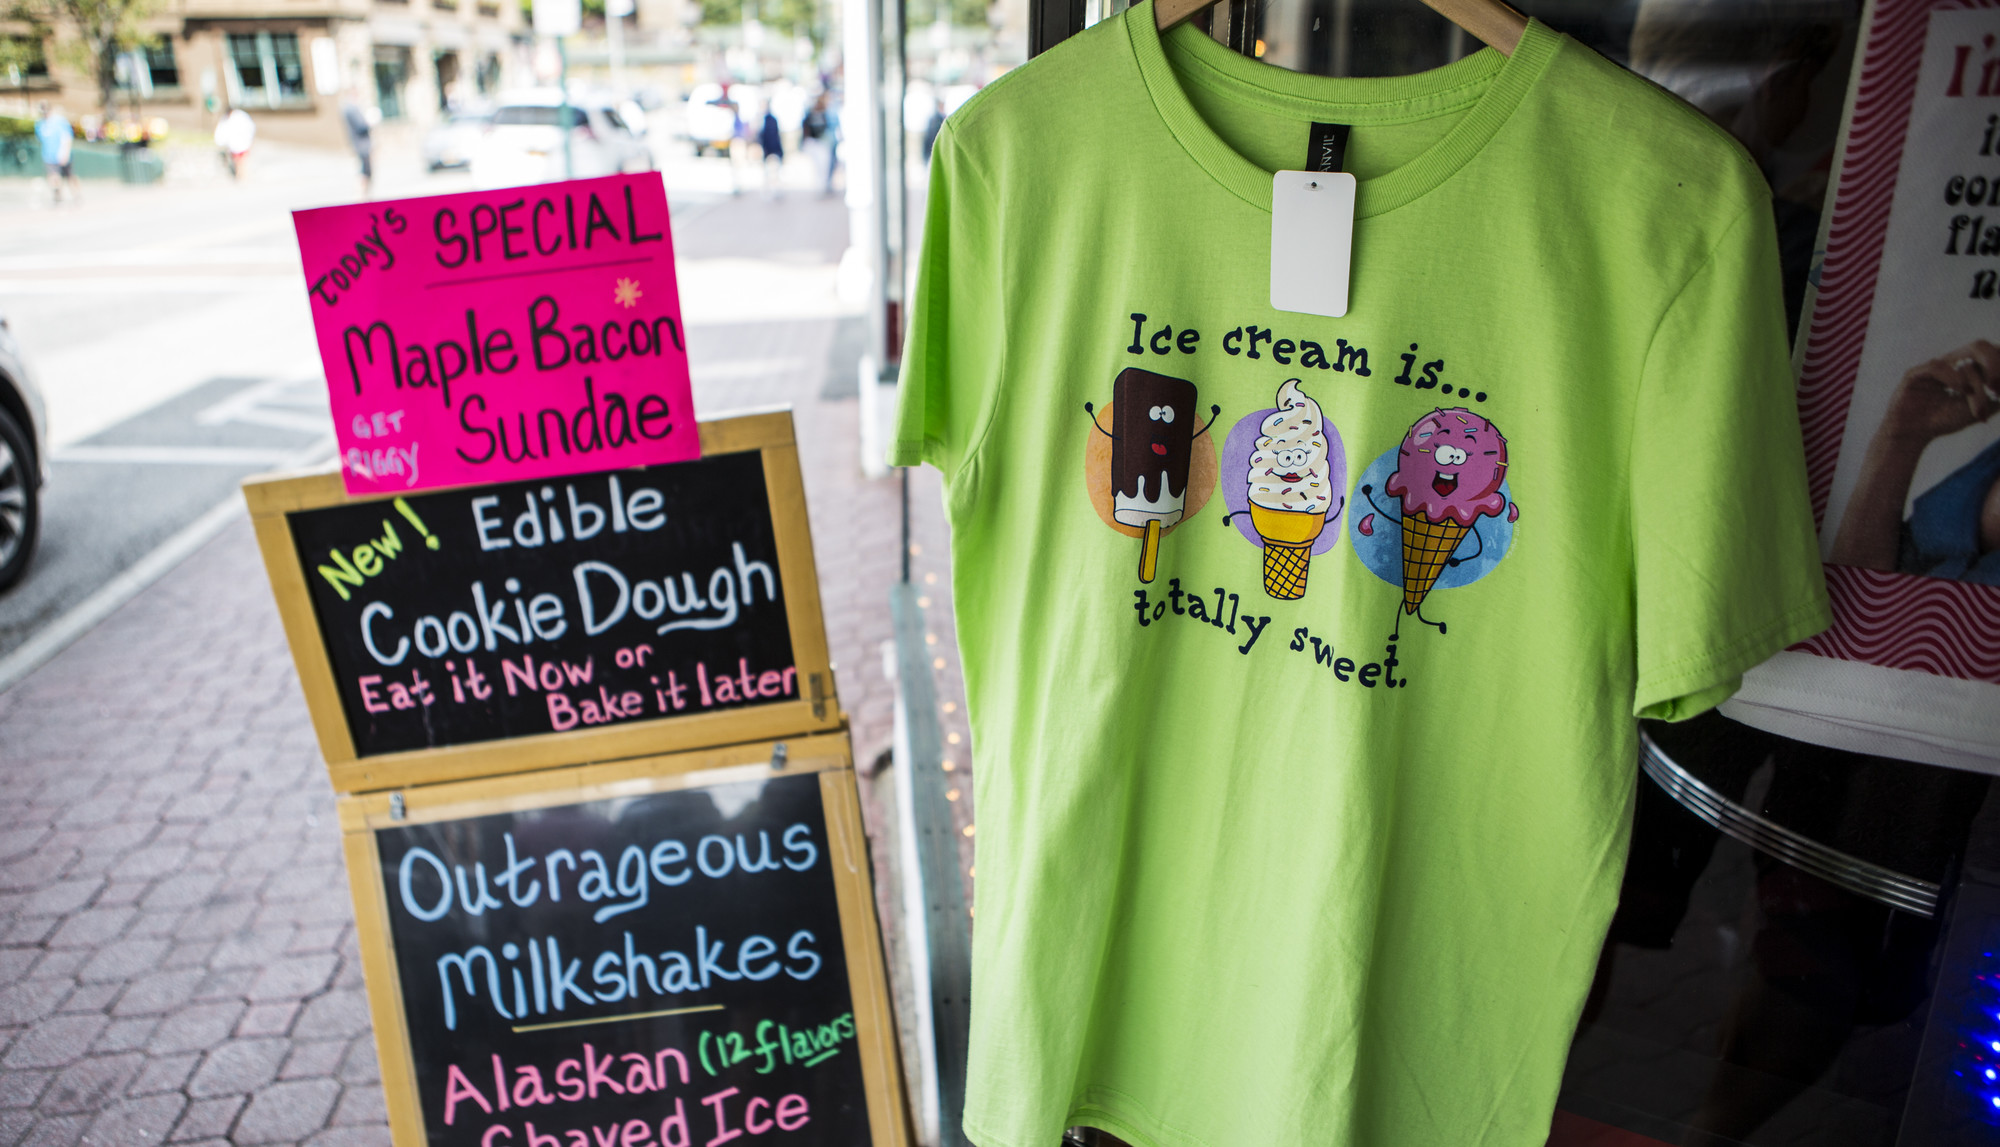 A sign advertising maple bacon ice cream sundaes sits next to a tshirt outside a shop.